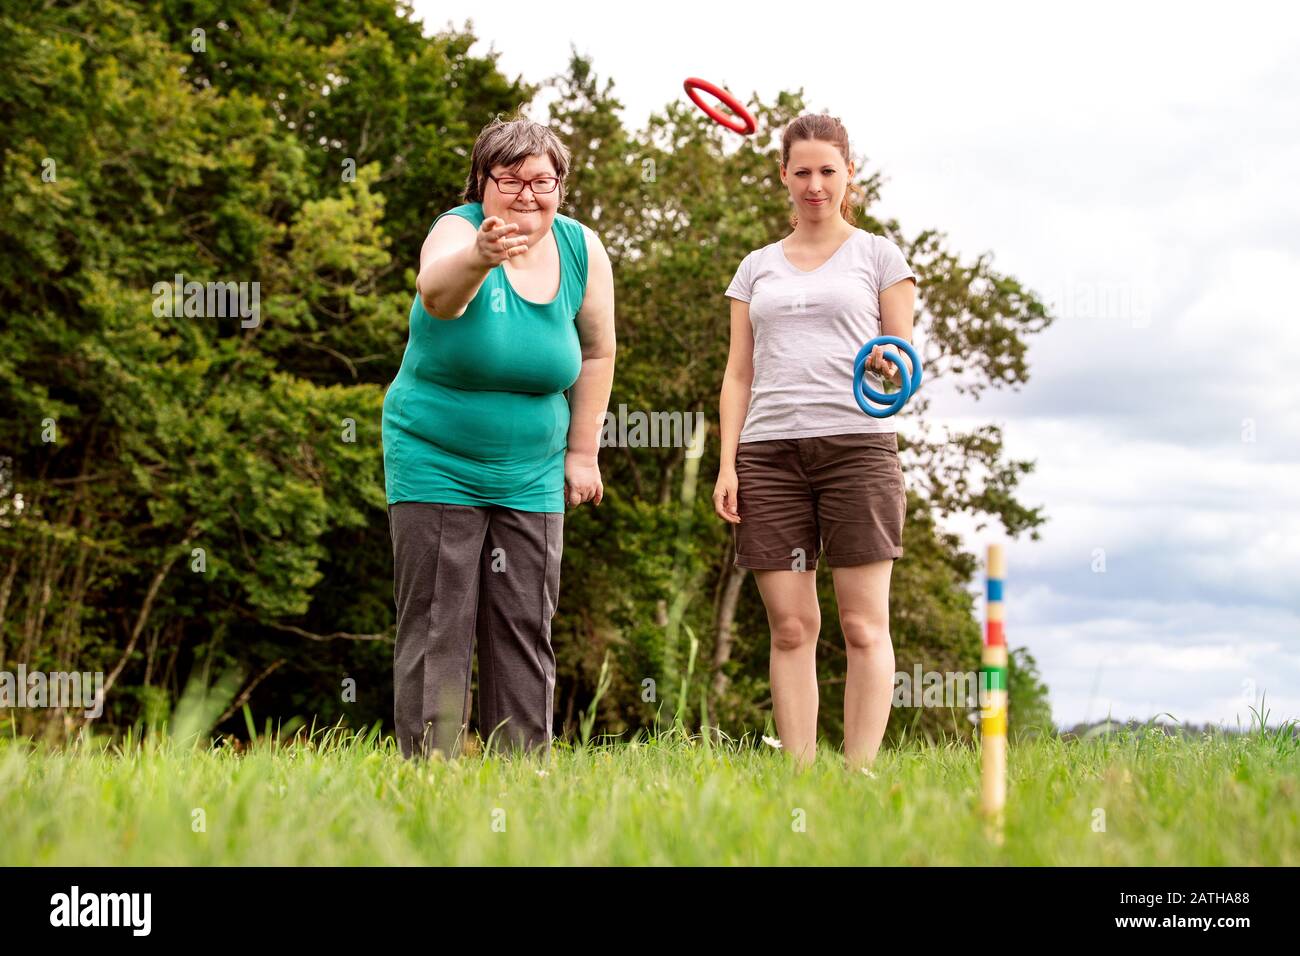 mental disabled woman is playing a game to train her motor abilities, exercises with a friend or therapist outdoors on a meadow Stock Photo